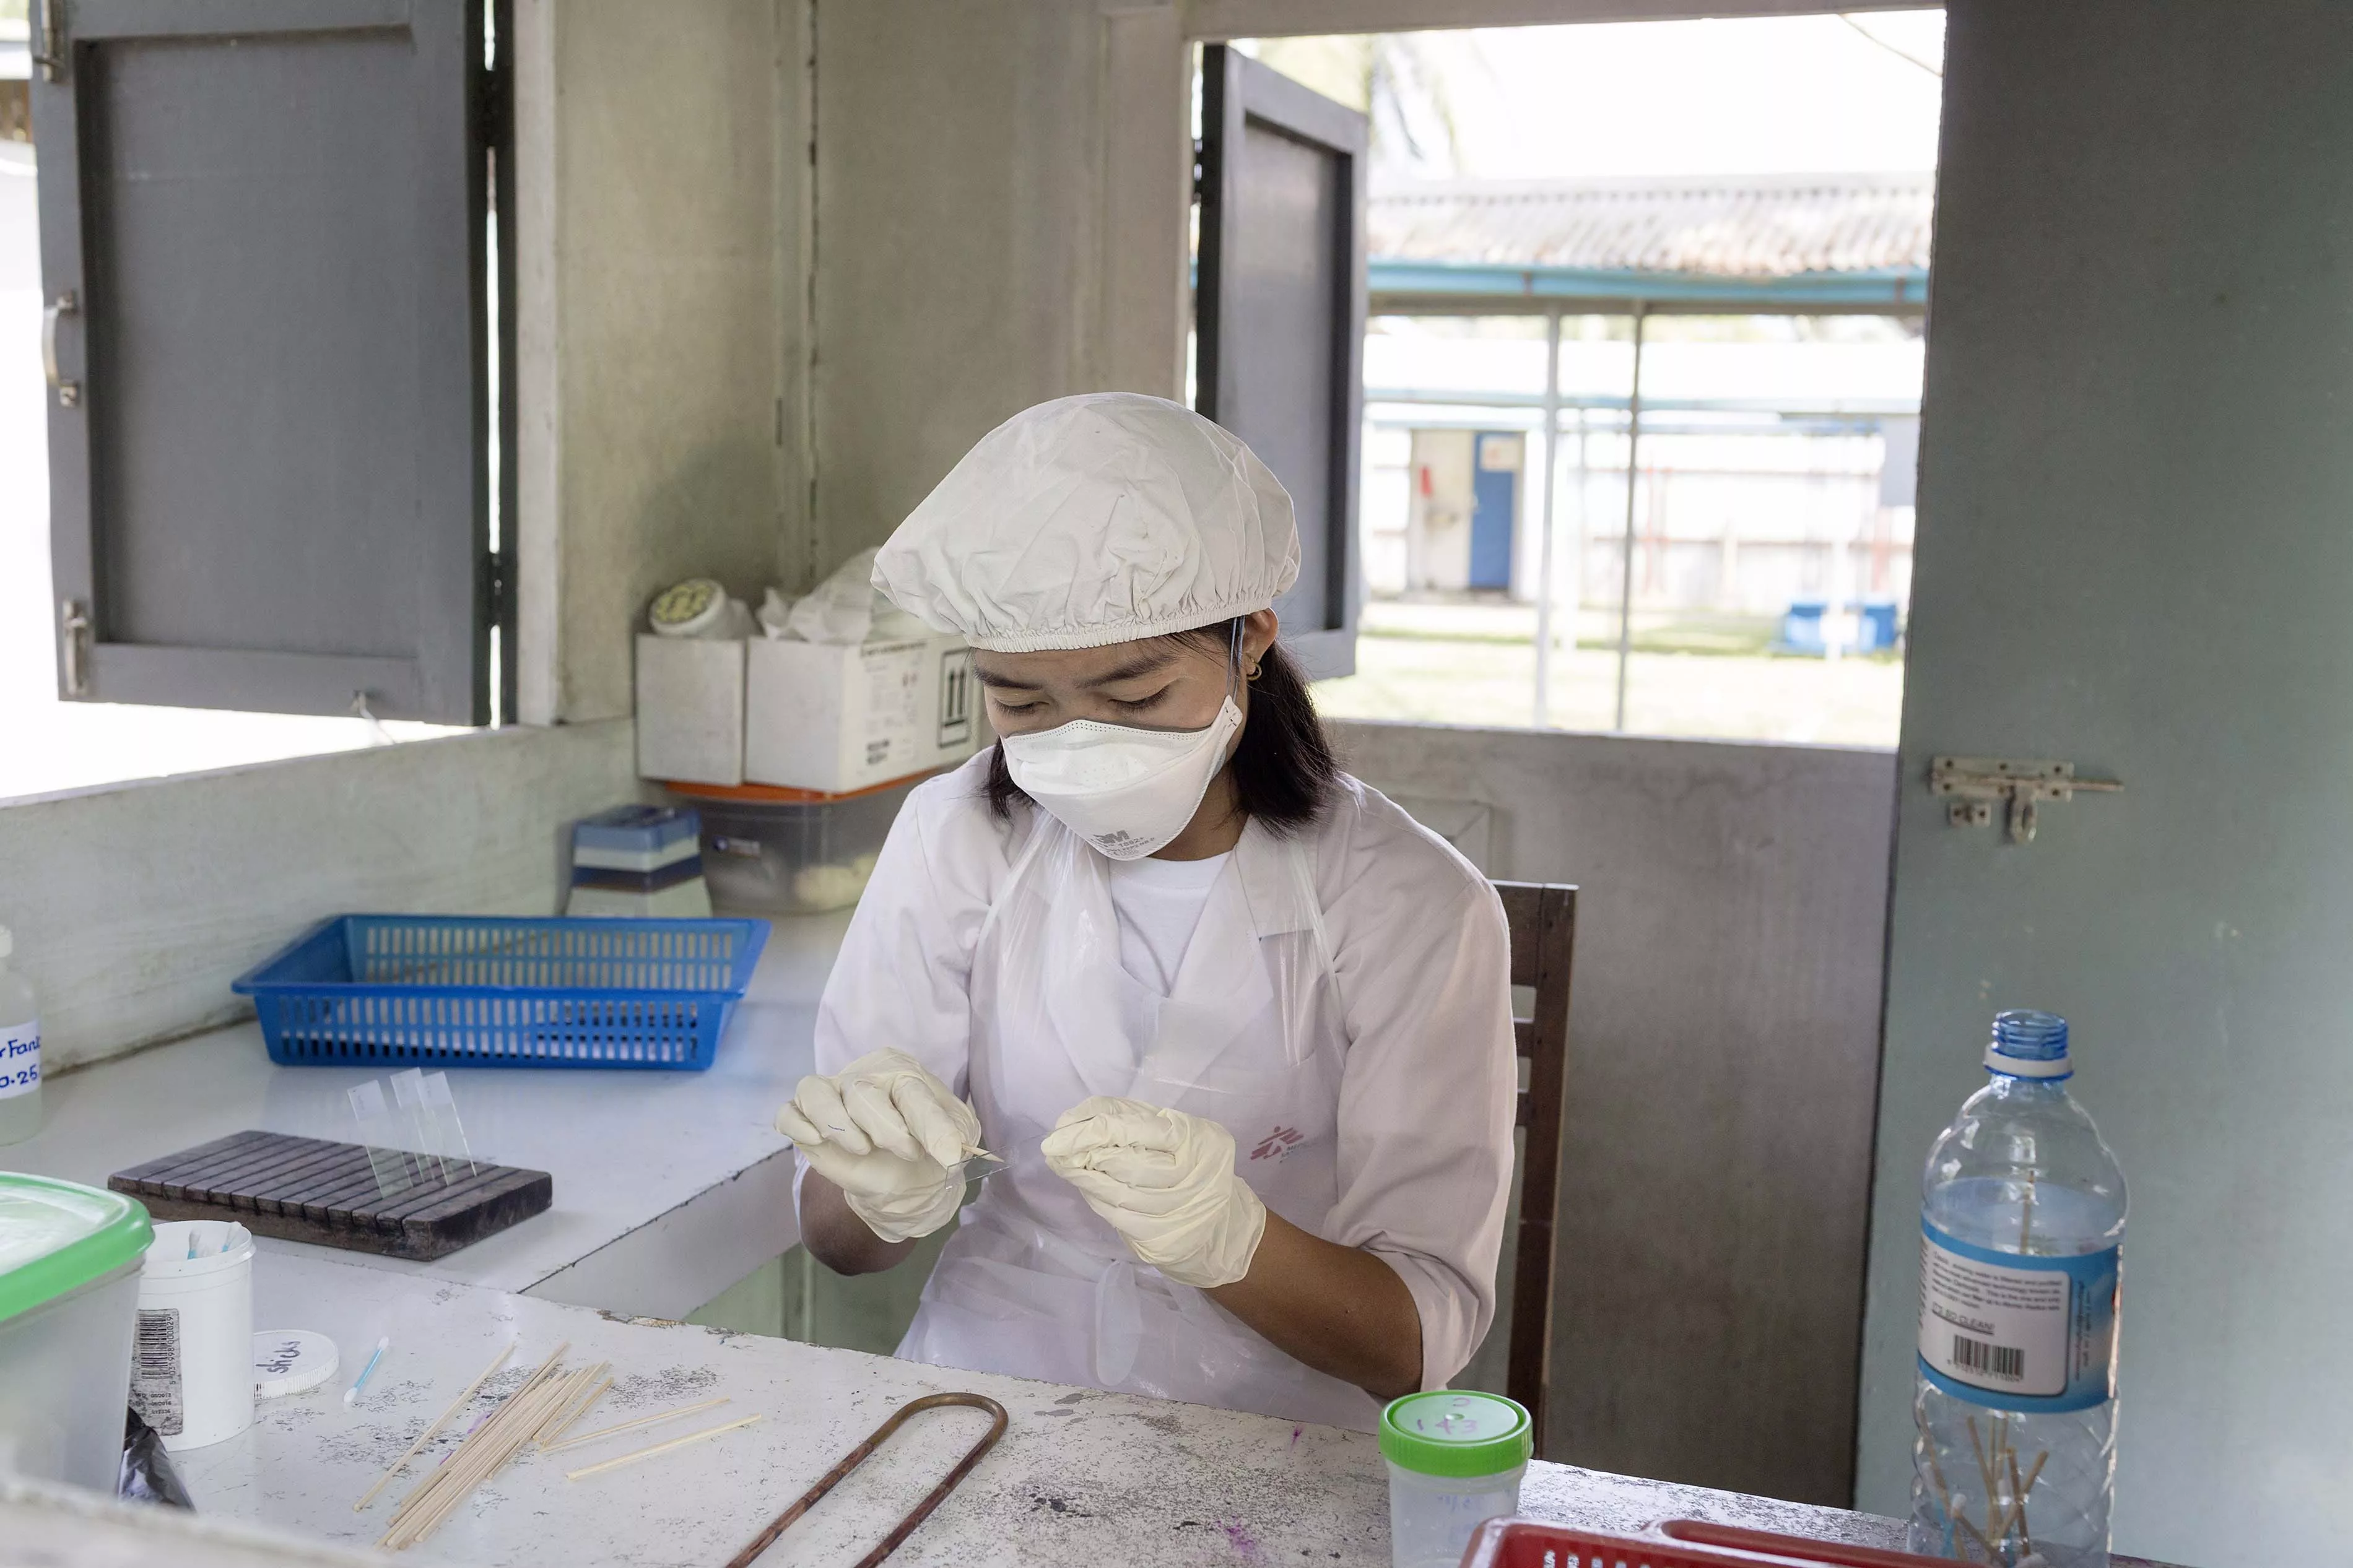 MSF staff member Nant Poe Ou performs an initial screening of a sputum sample for the presence of mycobacterium tuberculosis at MSF's Insein clinic in Yangon, Myanmar, Feb. 22, 2018.